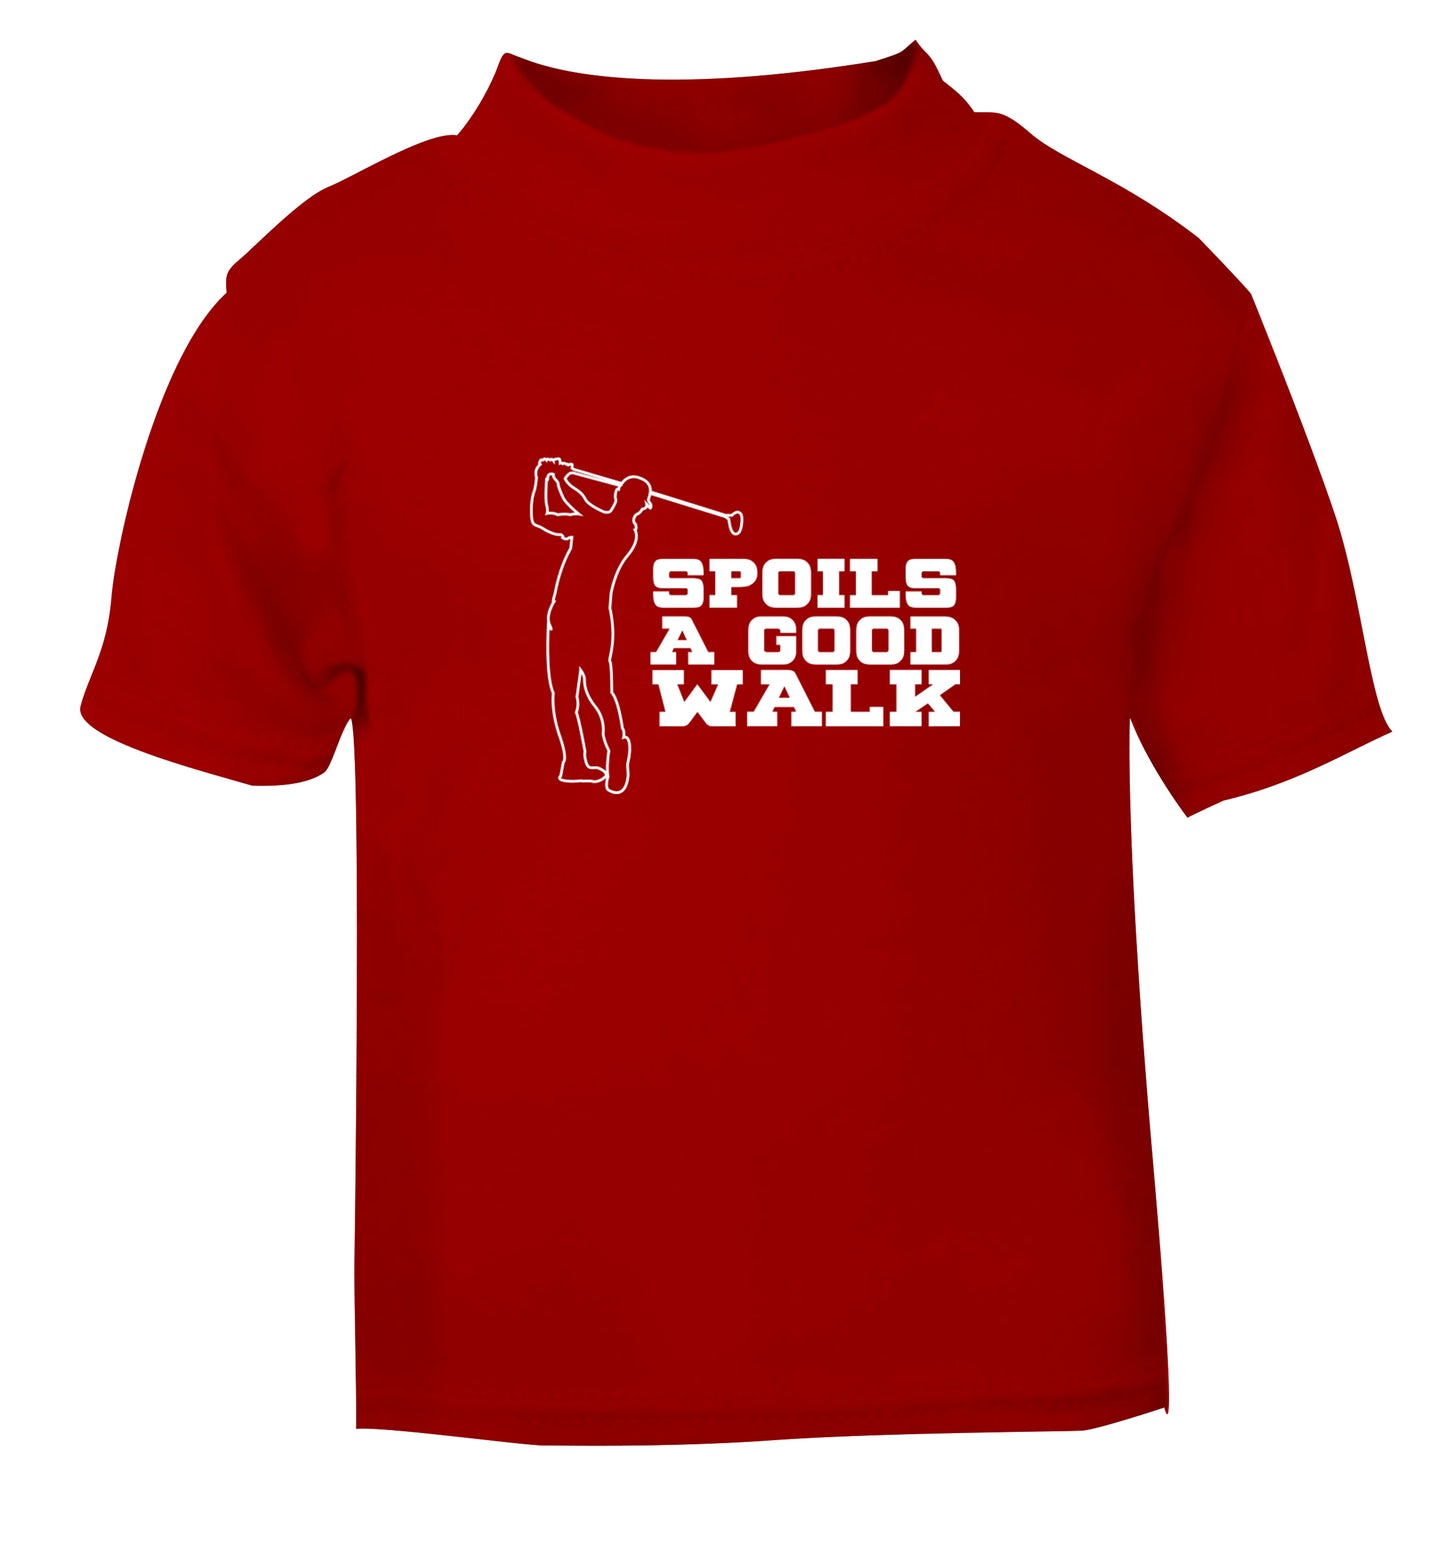 Golf spoils a good walk red Baby Toddler Tshirt 2 Years